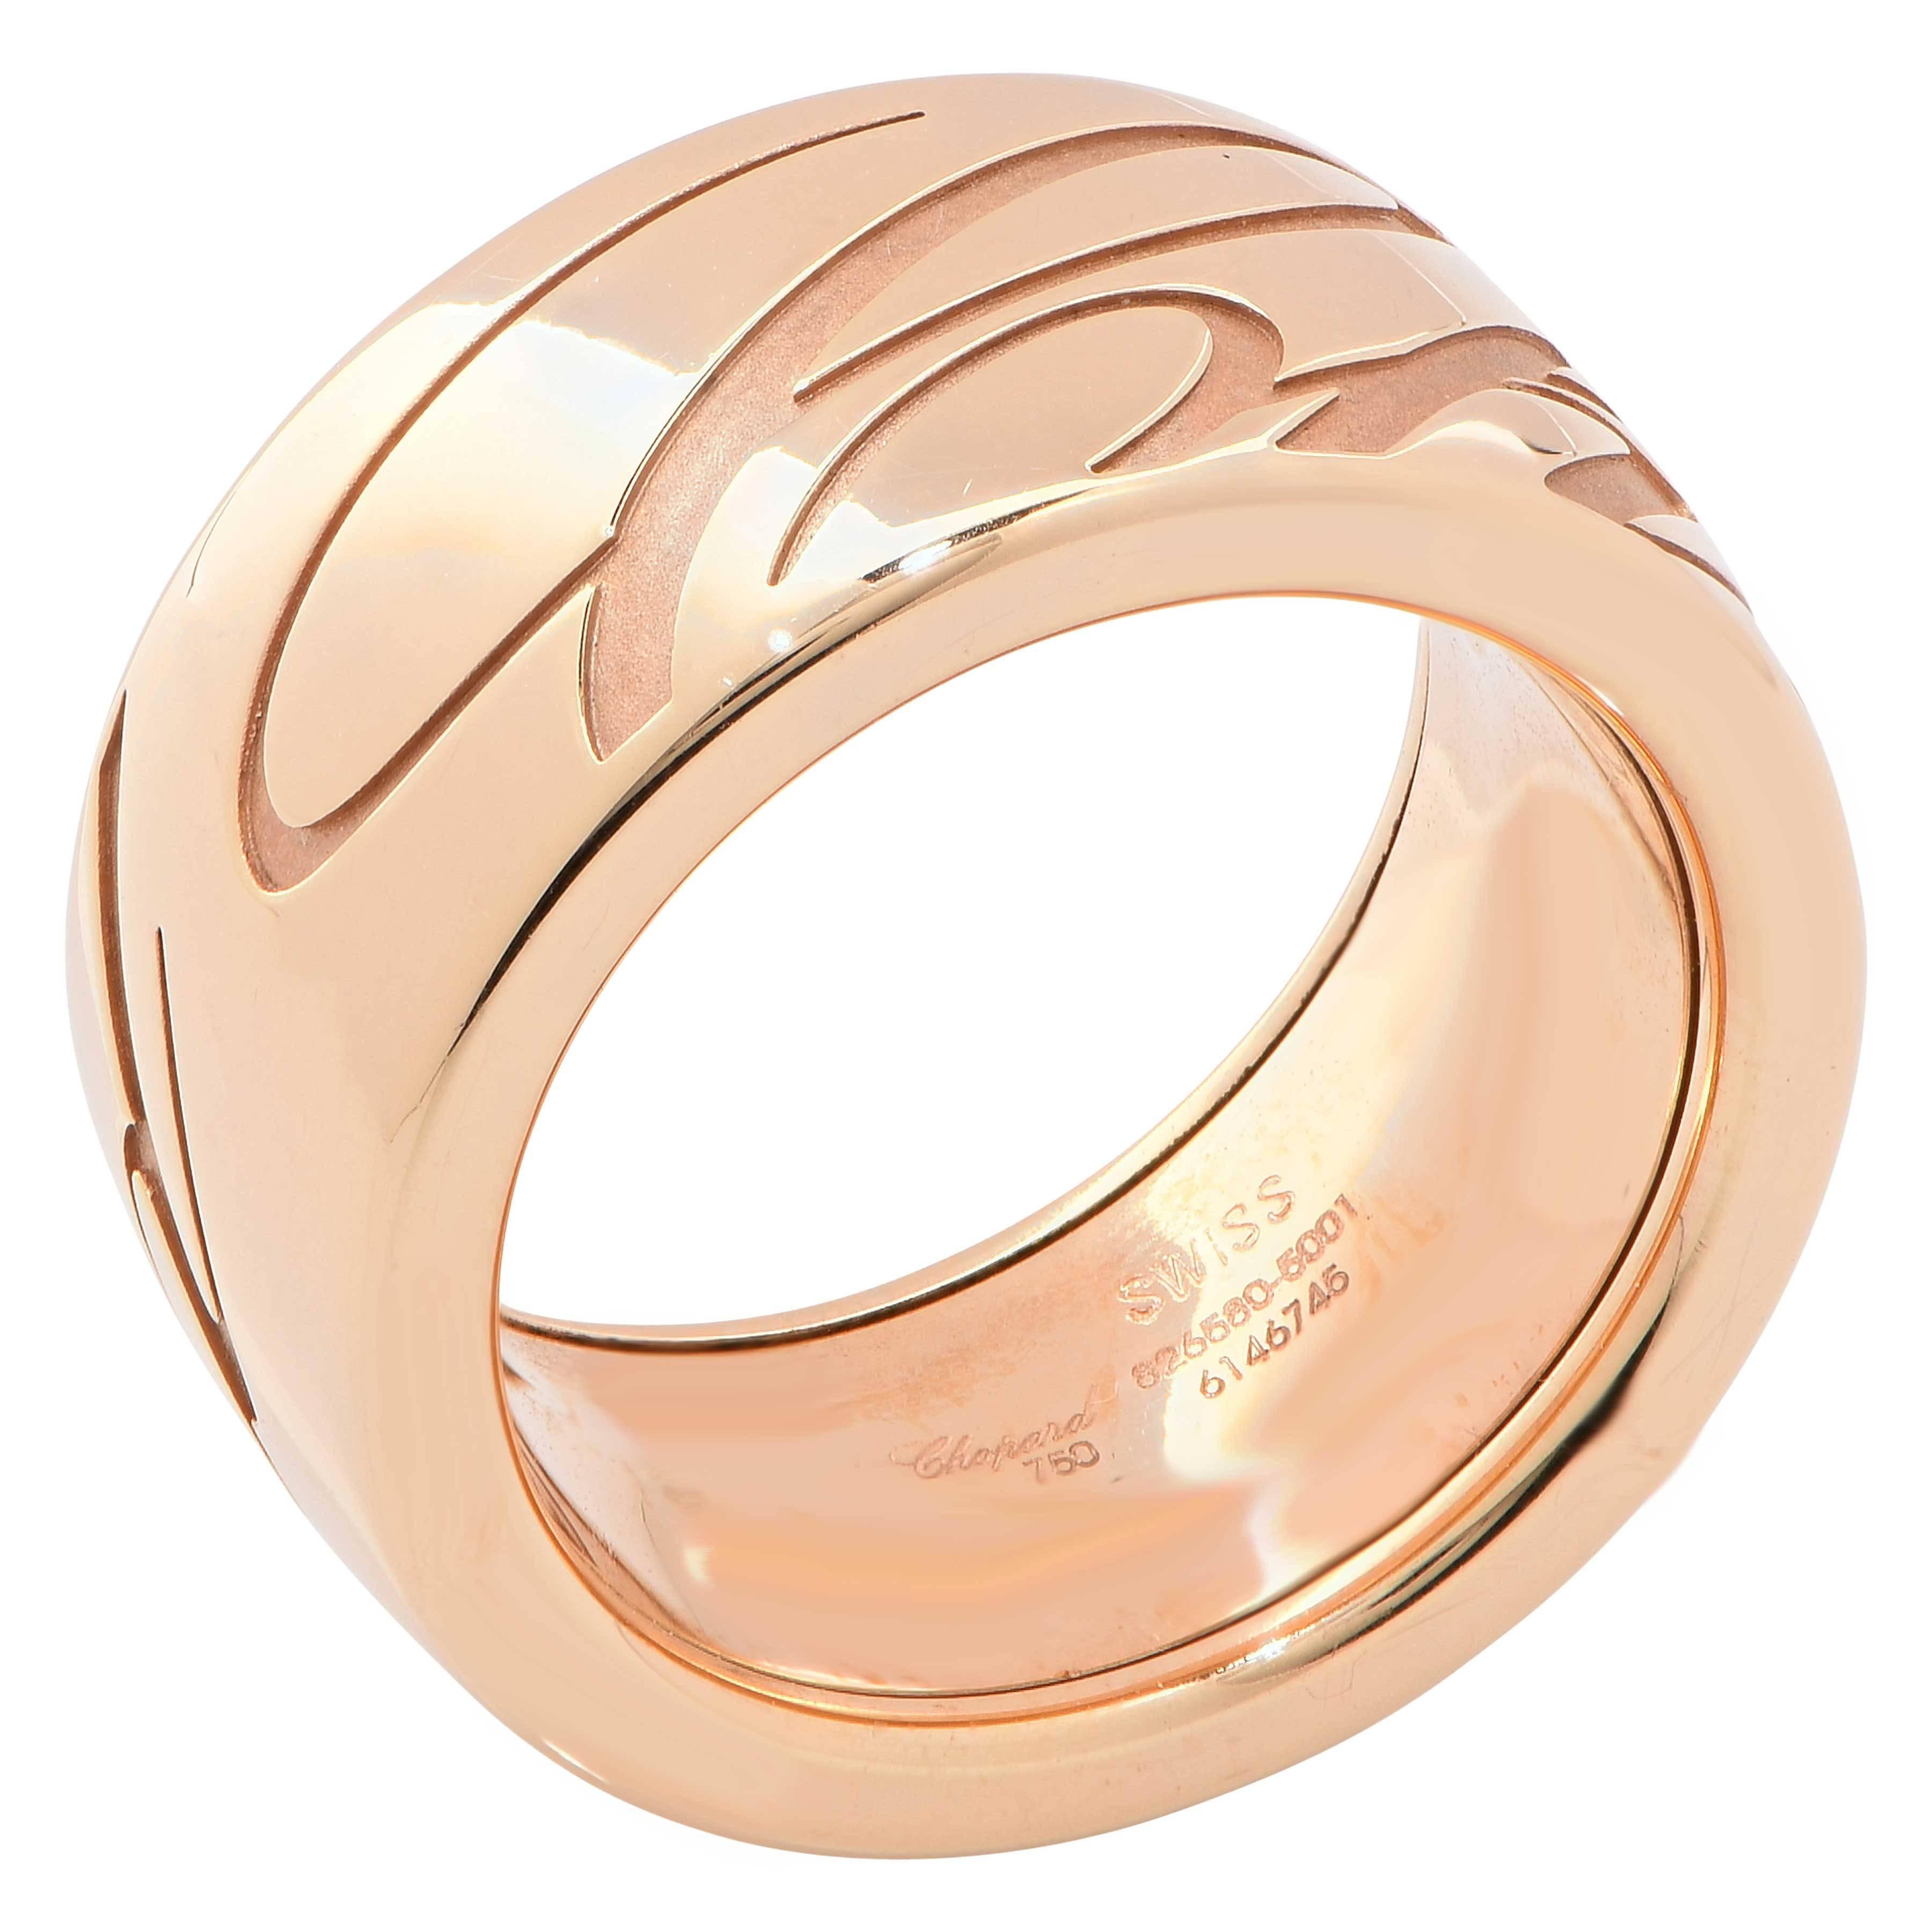 chopardissimo ring rose gold